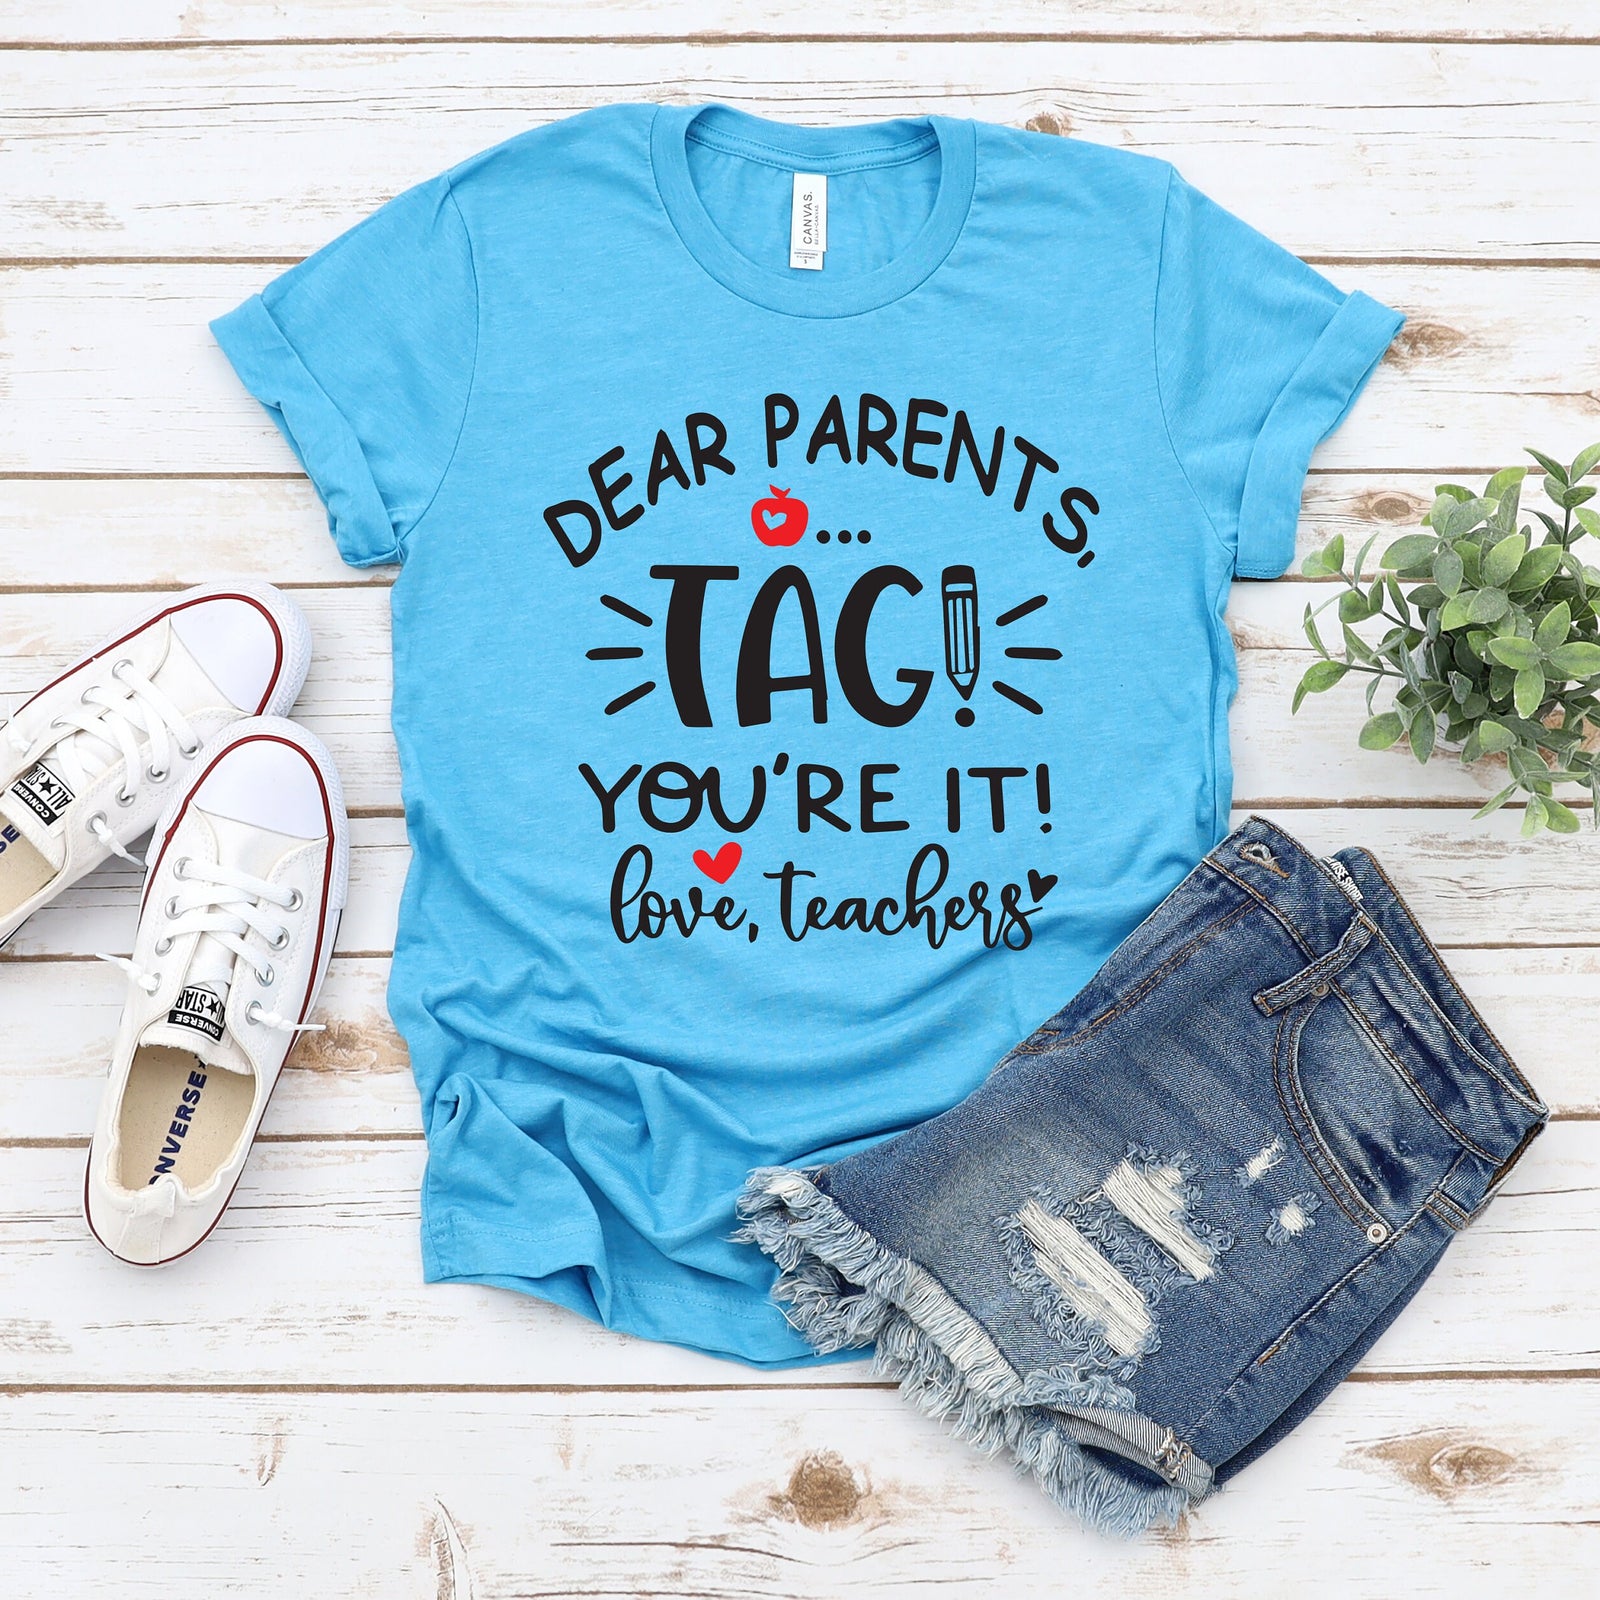 Dear Parents Tag You Are It Adult Unisex T Shirt - Teacher T Shirts - Teacher Appreciation Gift - End of Year - Summer